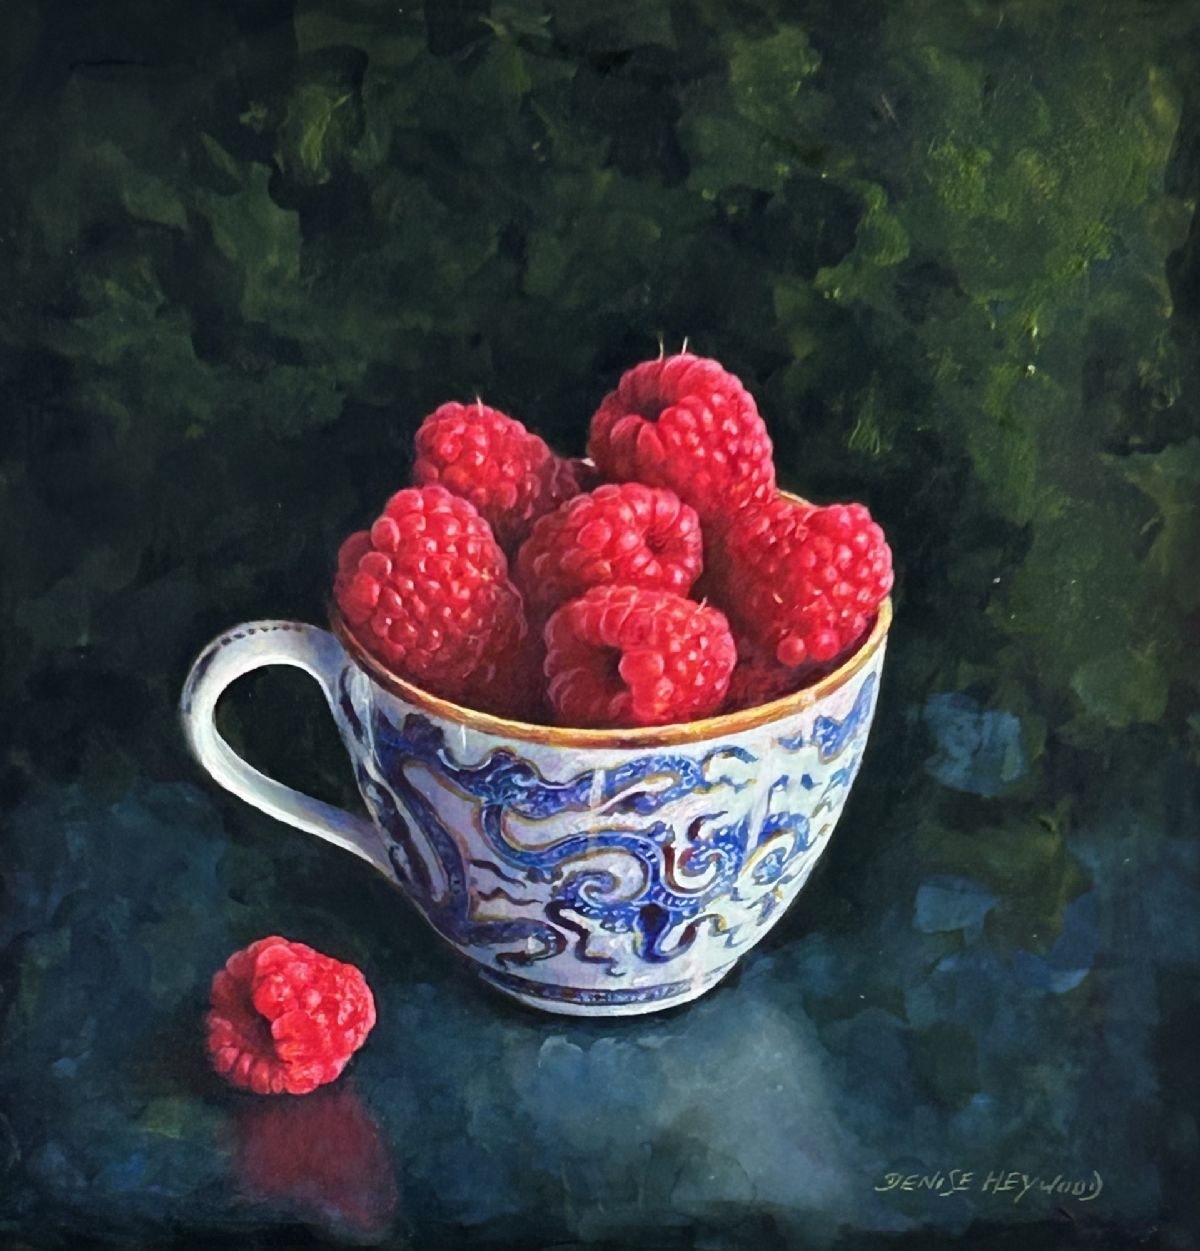 Raspberries in an Antique Cup